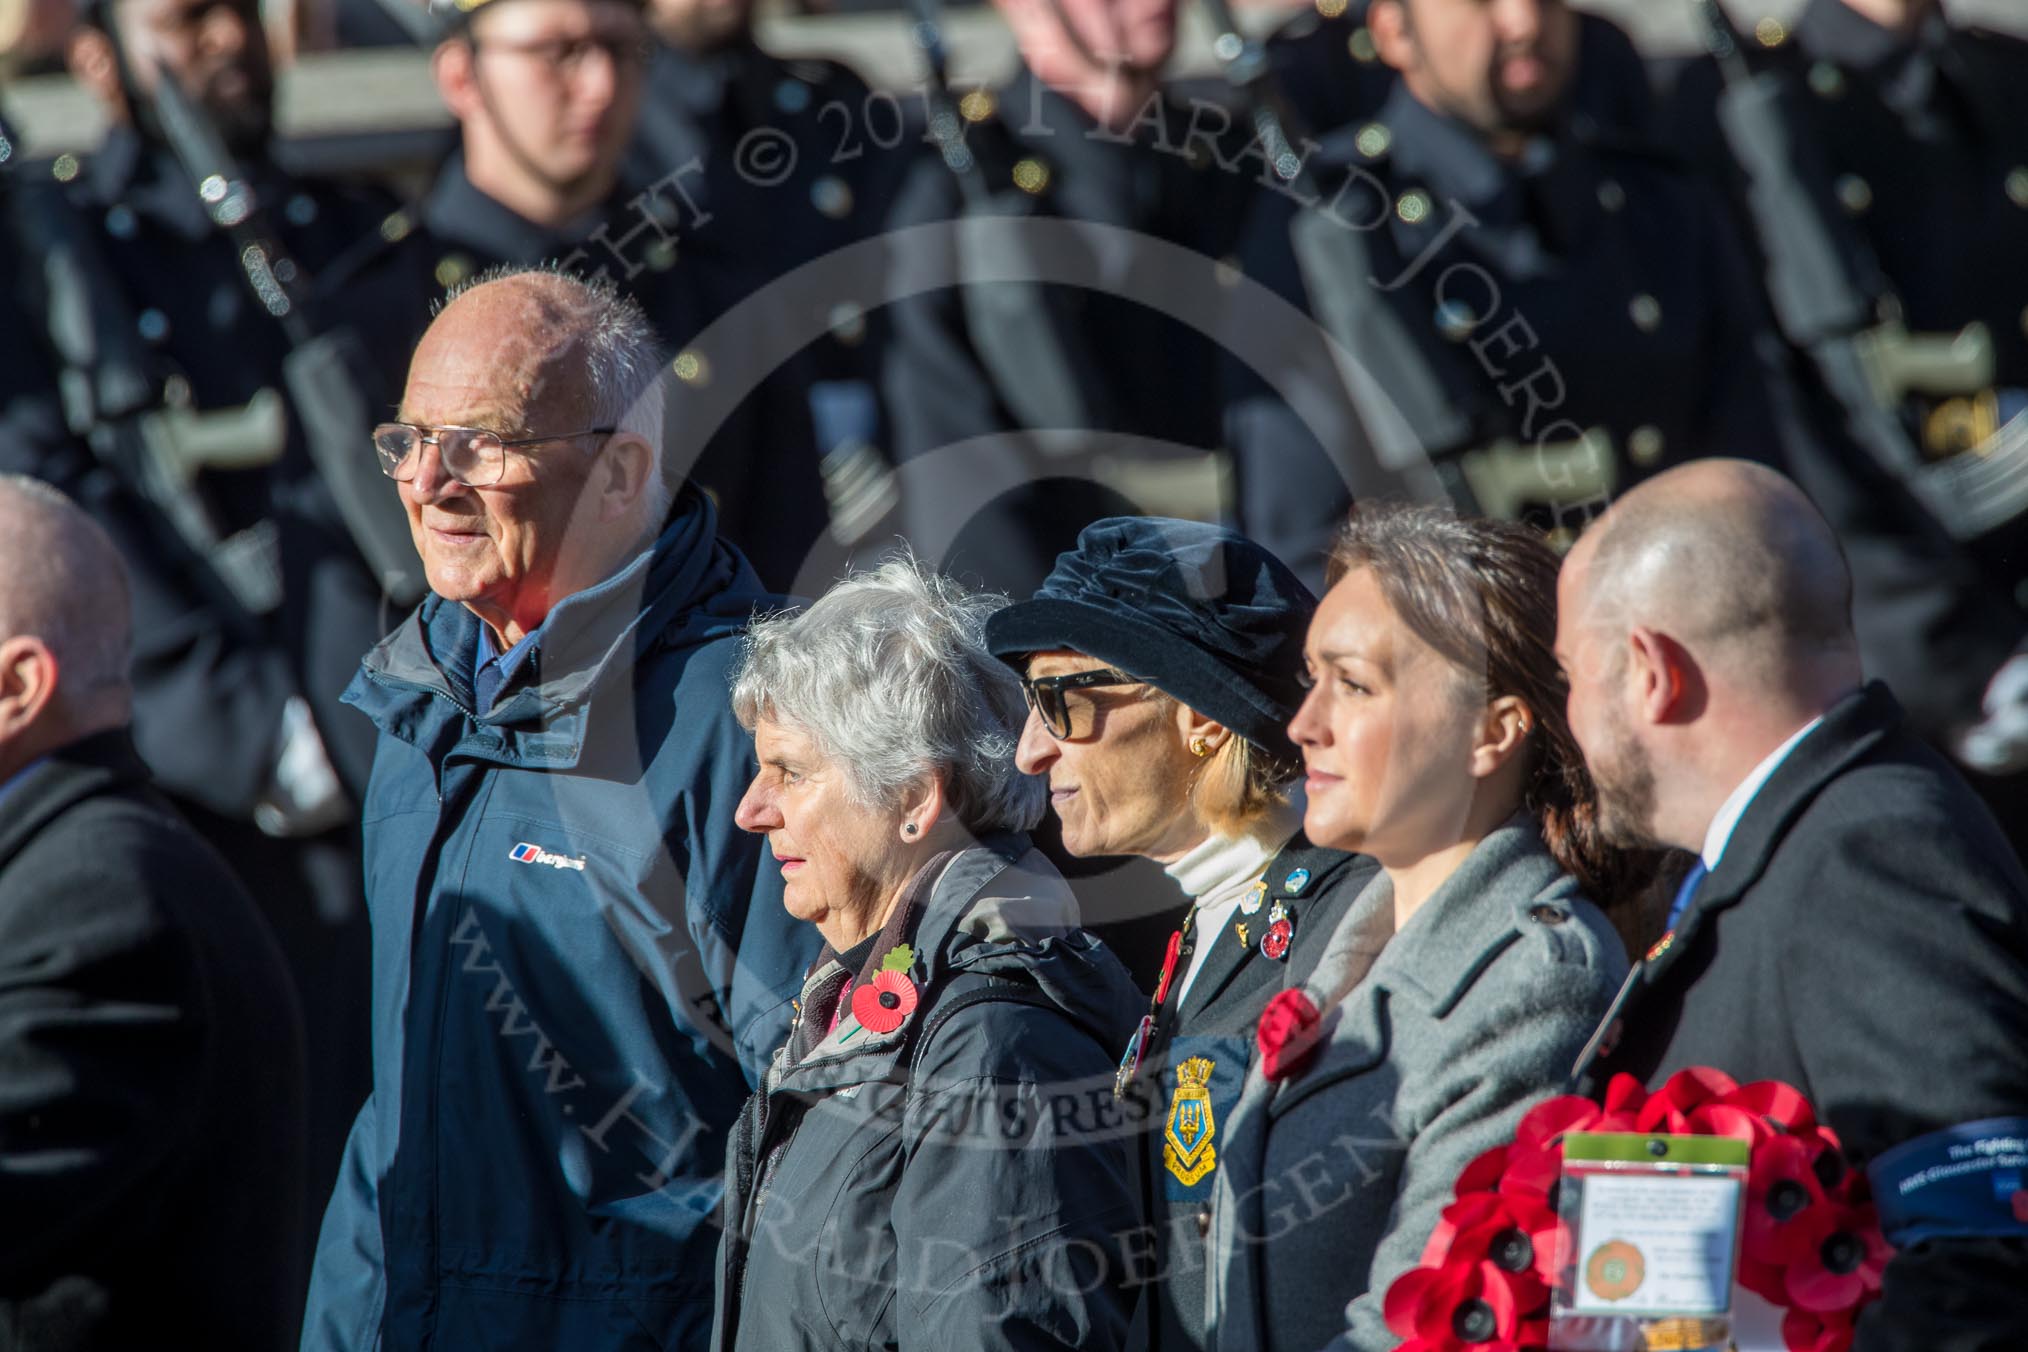 The Fisgard Association  (Group E42, 35 members) during the Royal British Legion March Past on Remembrance Sunday at the Cenotaph, Whitehall, Westminster, London, 11 November 2018, 11:47.